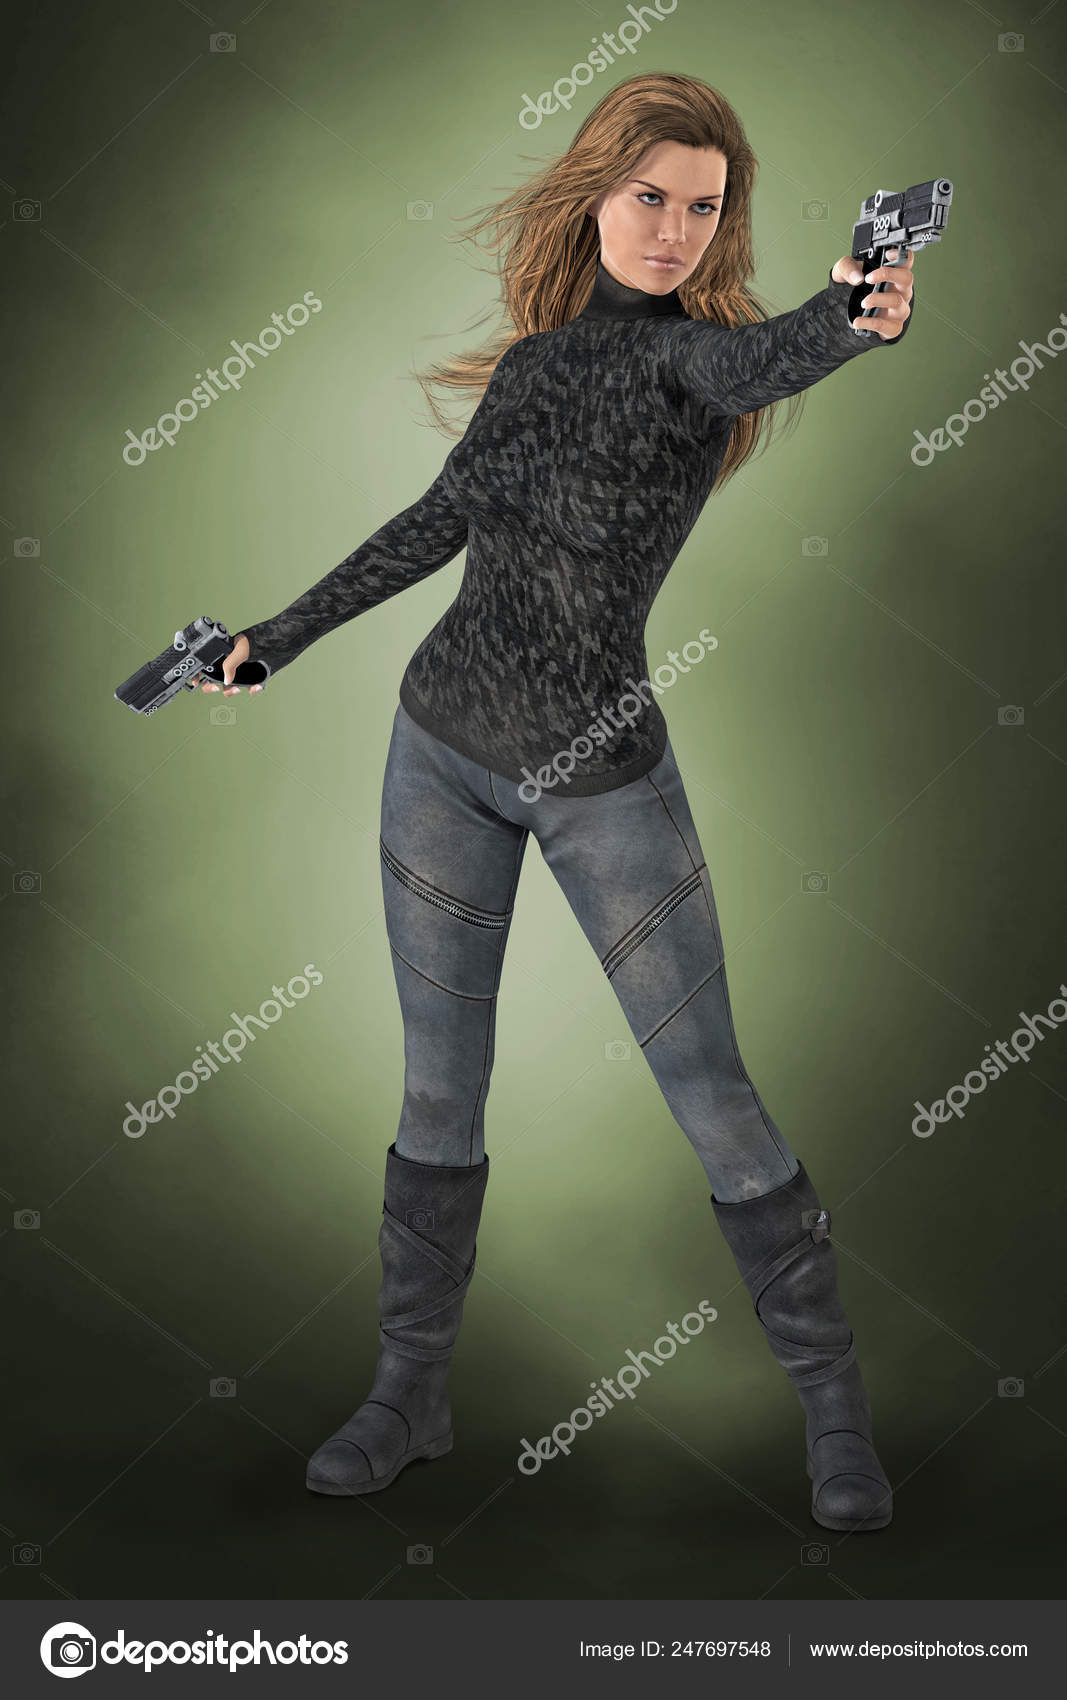 Hand Gun Pose Photos and Images | Shutterstock